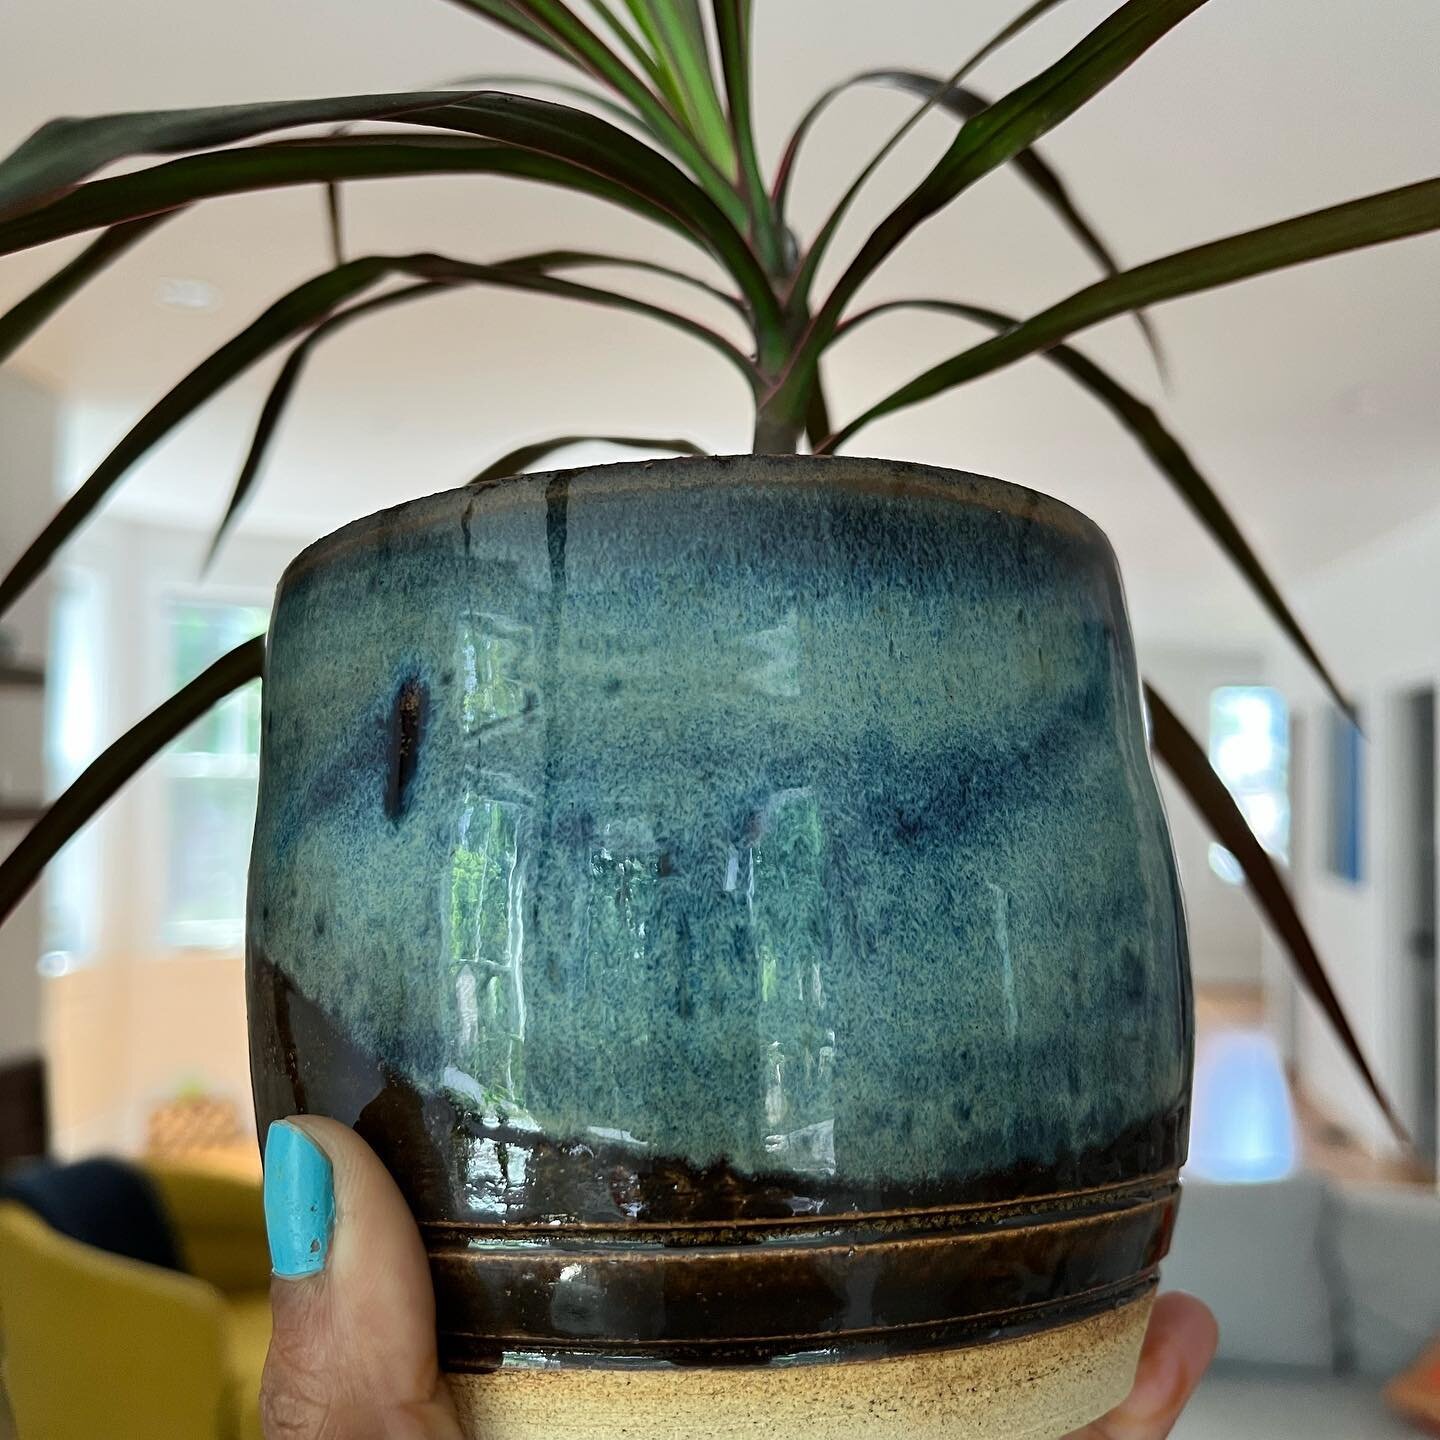 Uff! These planters and bowls 😍🥰
Ceramics is hard and extremely therapeutic and addictive. It has an element of surprise and monotony. Enough repetition where you think you have control and enough ambiguity where you have no idea what will turn up.